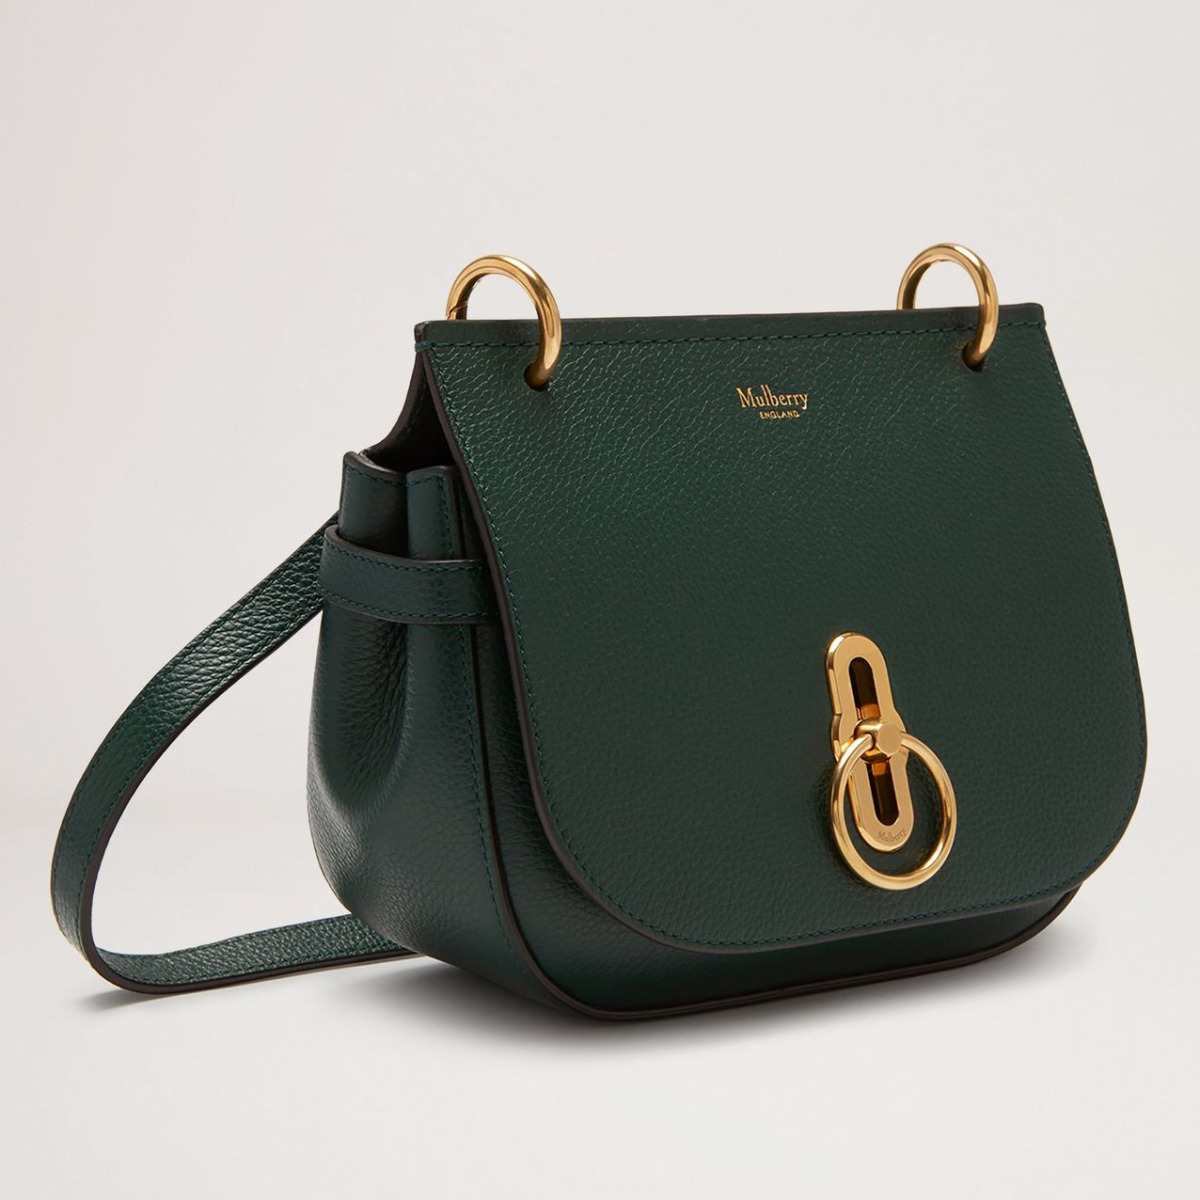 The Mulberry Amberley Satchel in size small, in green leather, with a crossbody/shoulder strap. 